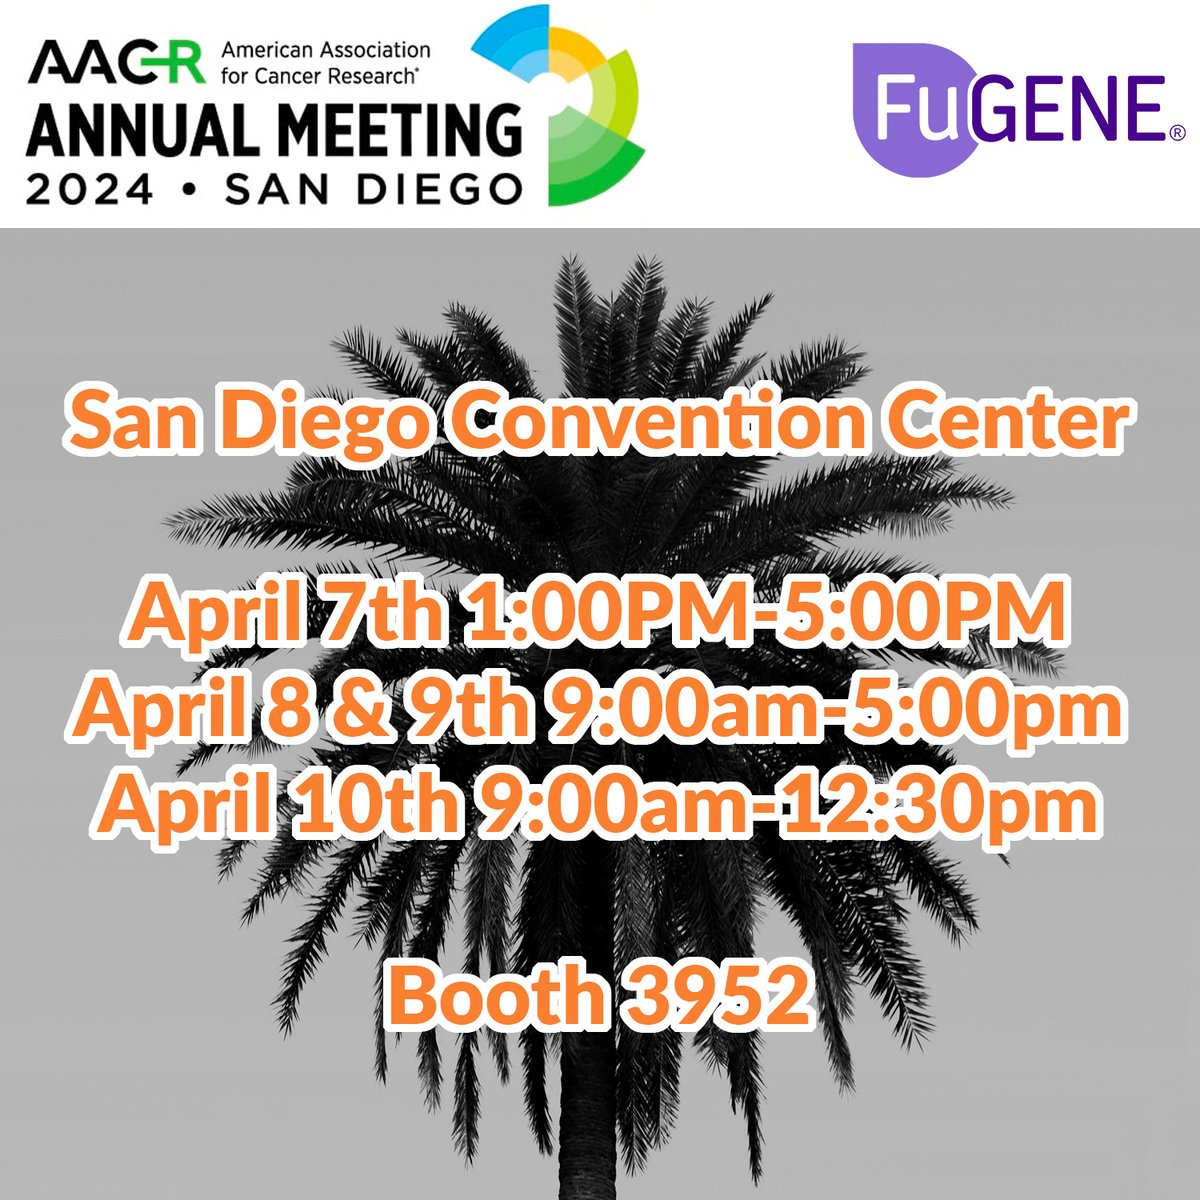 We are at day 1 of the annual AACR meeting at the San Diego Convention Center! Come visit us the next 4 days at booth # 3952!

#AACR24 #cancerresearchsaveslives #FuGENE